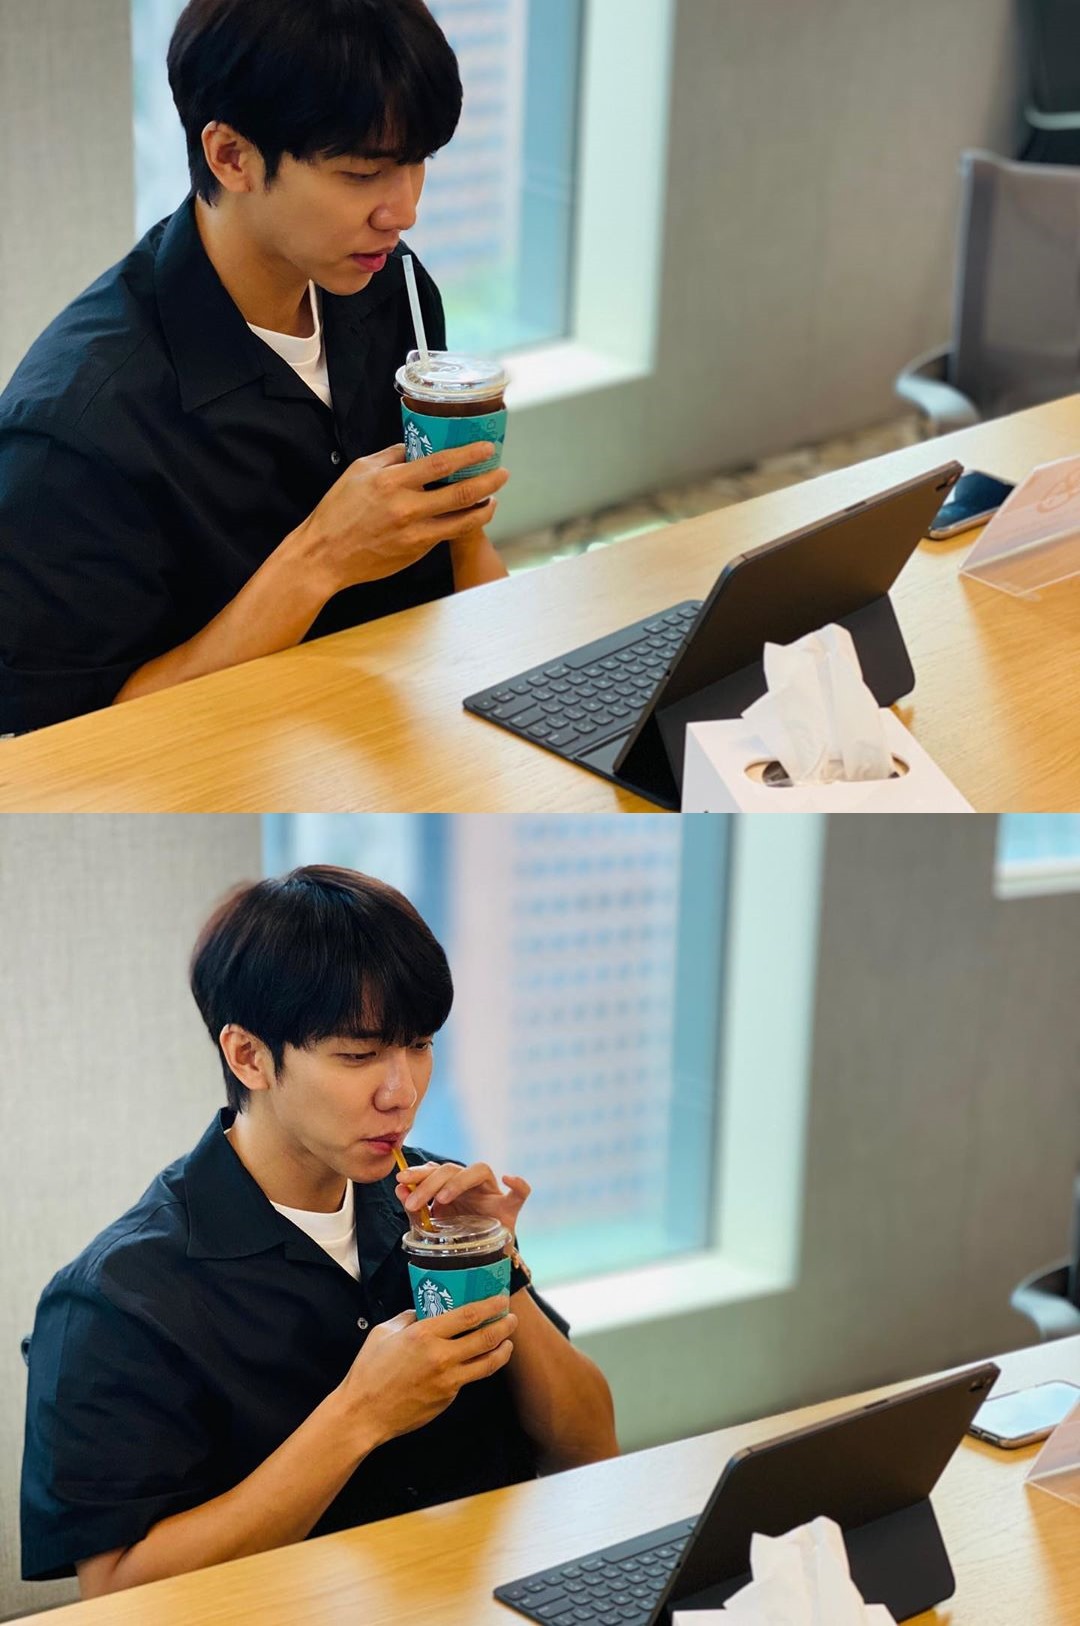 Singer and actor Lee Seung-gi released an Interview-certified shot.On the 3rd, Lee Seung-gis official Instagram   account posted a picture with the article Twogether Online Round Intubation.Lee Seung-gi is in a video Interview in the open photo. Lee Seung-gi is drinking Coffee and is working on an Interview with a relaxed look.Lee still boasted a warm visual and dandy charm, which made him admire. While he was just like his debut, his appearance caught the attention of netizens.Lee Seung-gis Twogether, an eye-cleaning healing travel variety that appeared with Ryu Ho, was released on Netflix on the 26th of last month.Photo = Lee Seung-gi Instagram  